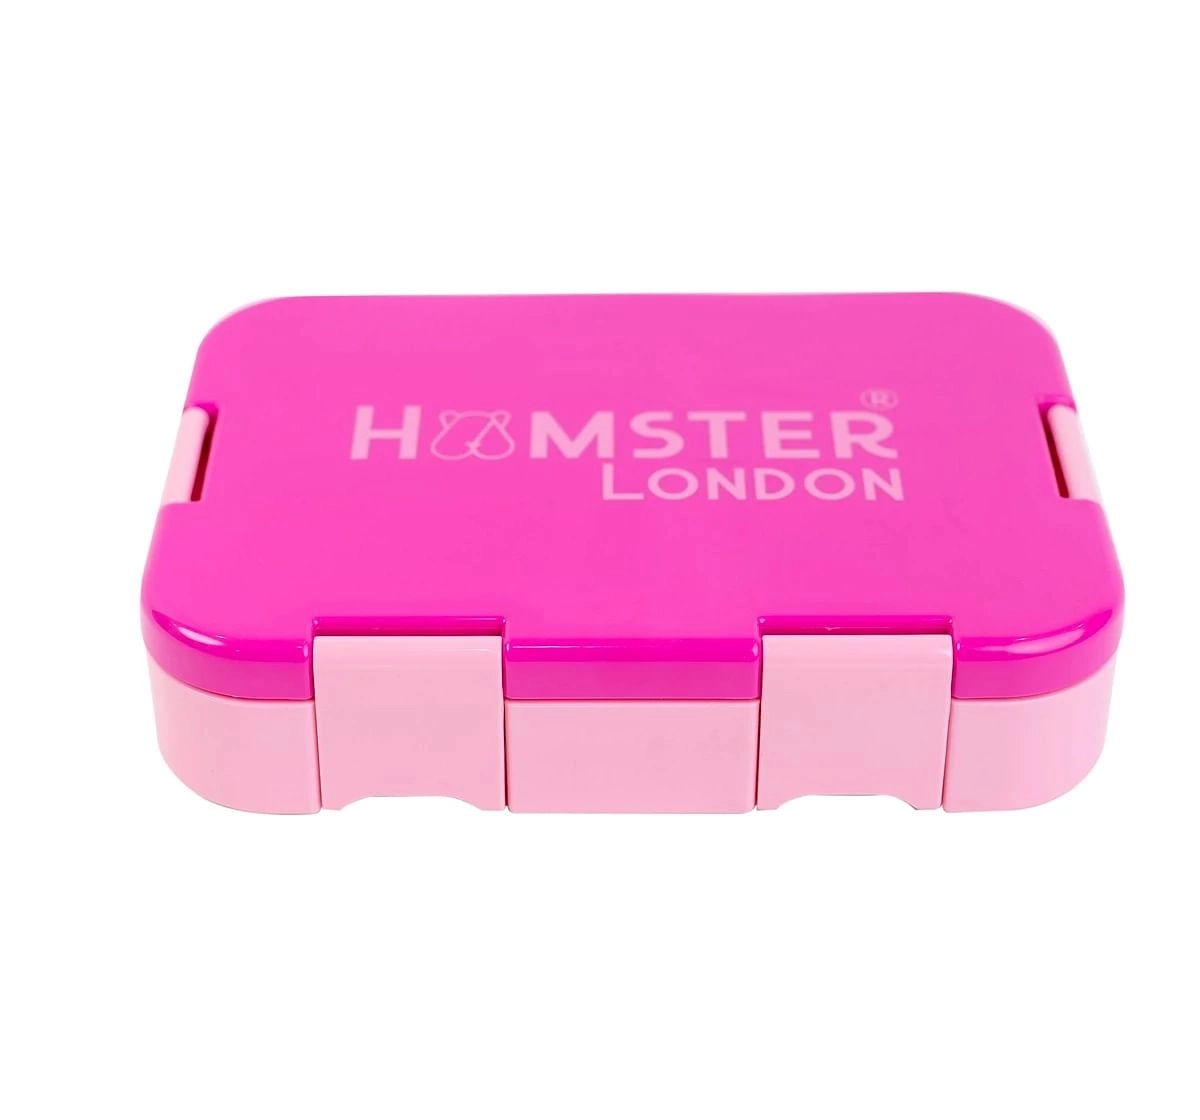 Hamster London Bento Box, Lunch Box For Kids, Pink, 3Y+